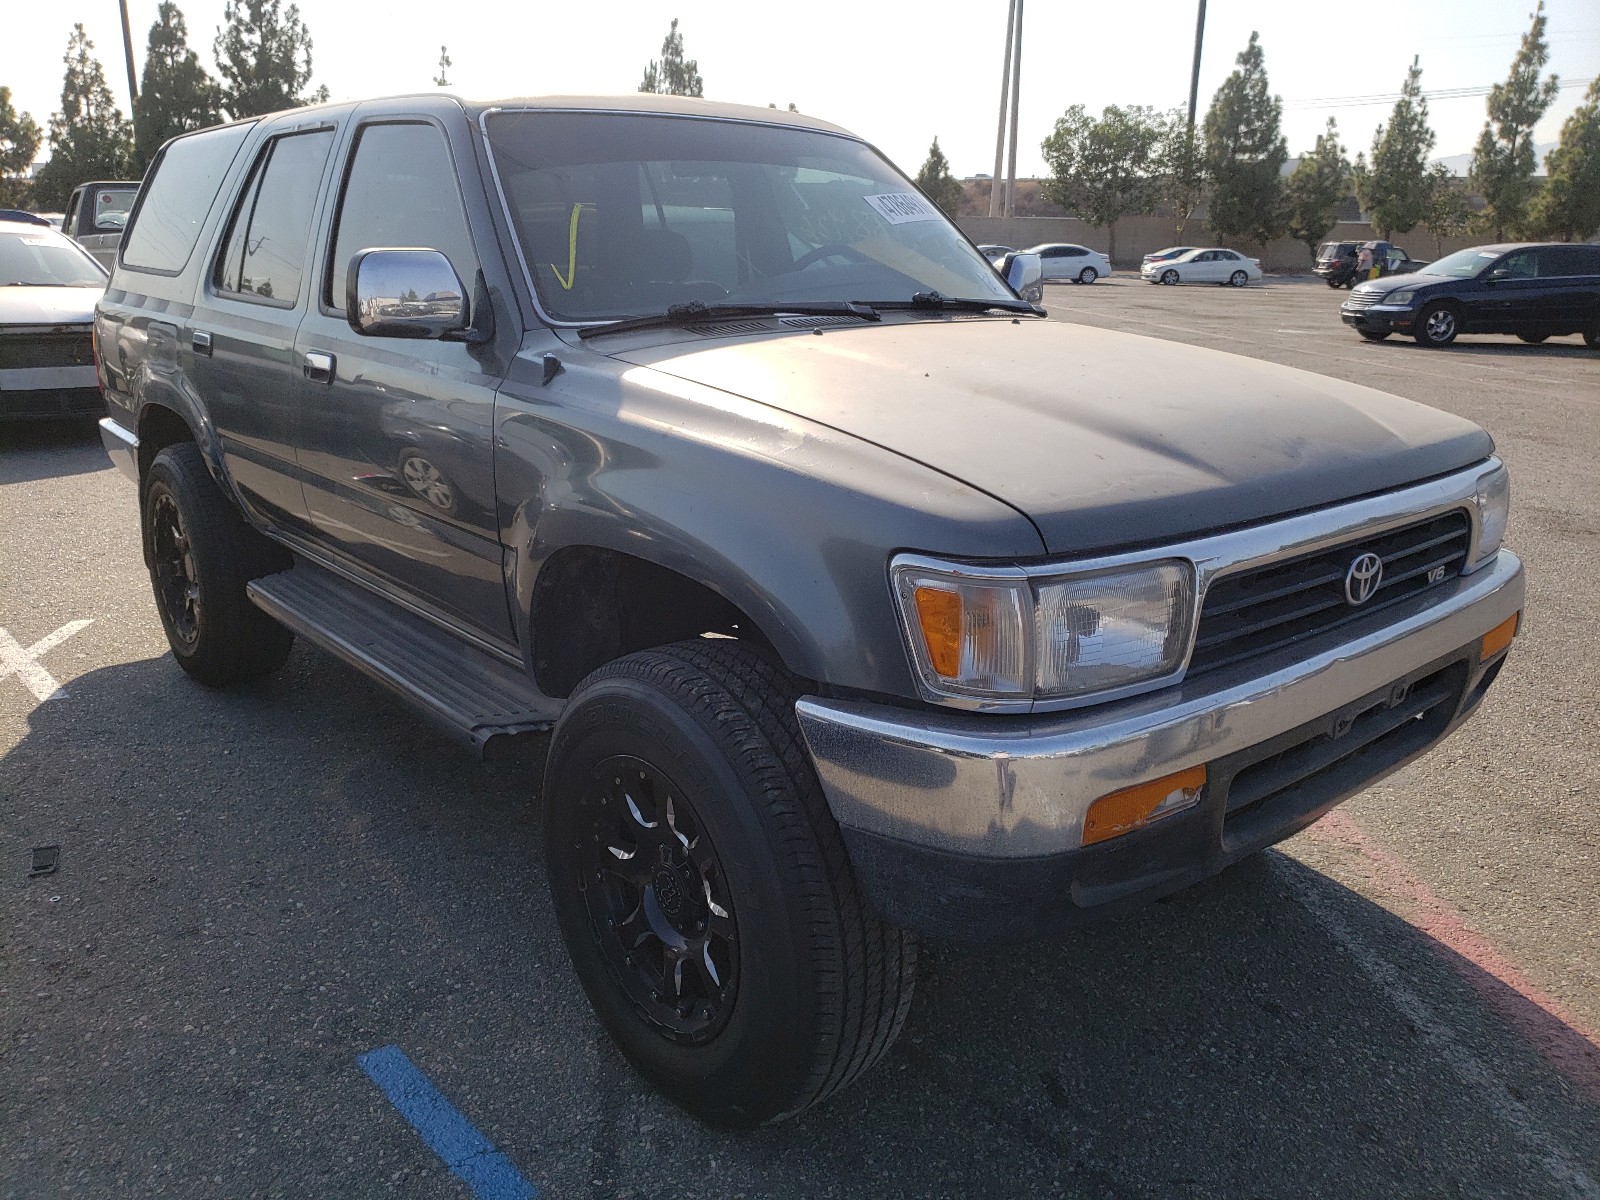 1992 toyota 4runner vn for sale at copart rancho cucamonga ca lot 47864910 salvagereseller com 1992 toyota 4runner vn for sale at